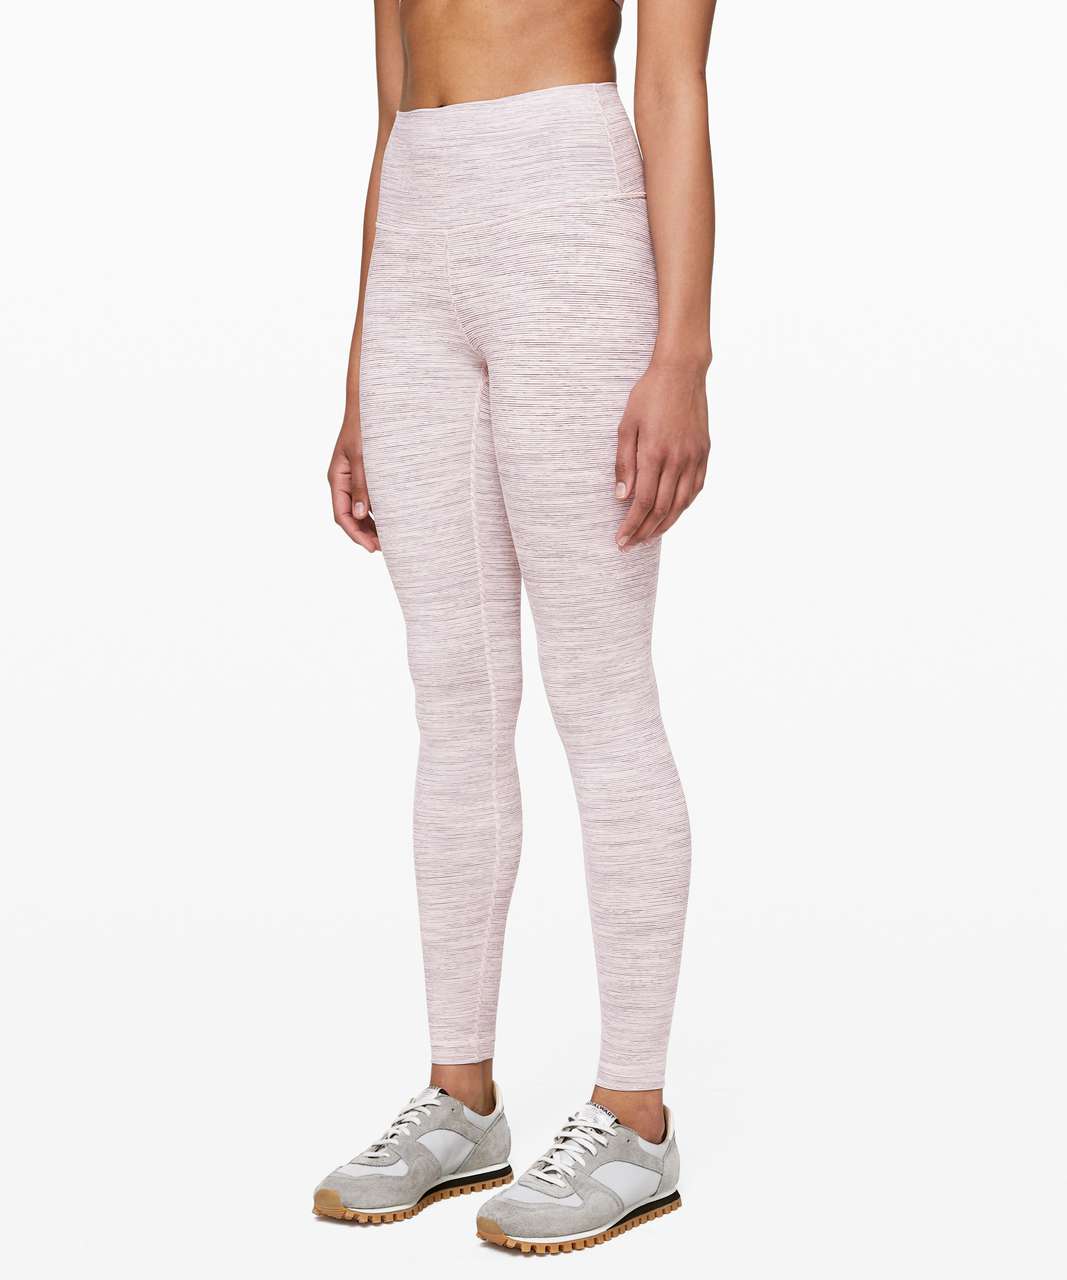 Lululemon Wunder Under High Rise Tight 28" *Luxtreme - Wee Are From Space Pink Bliss Vintage Mauve